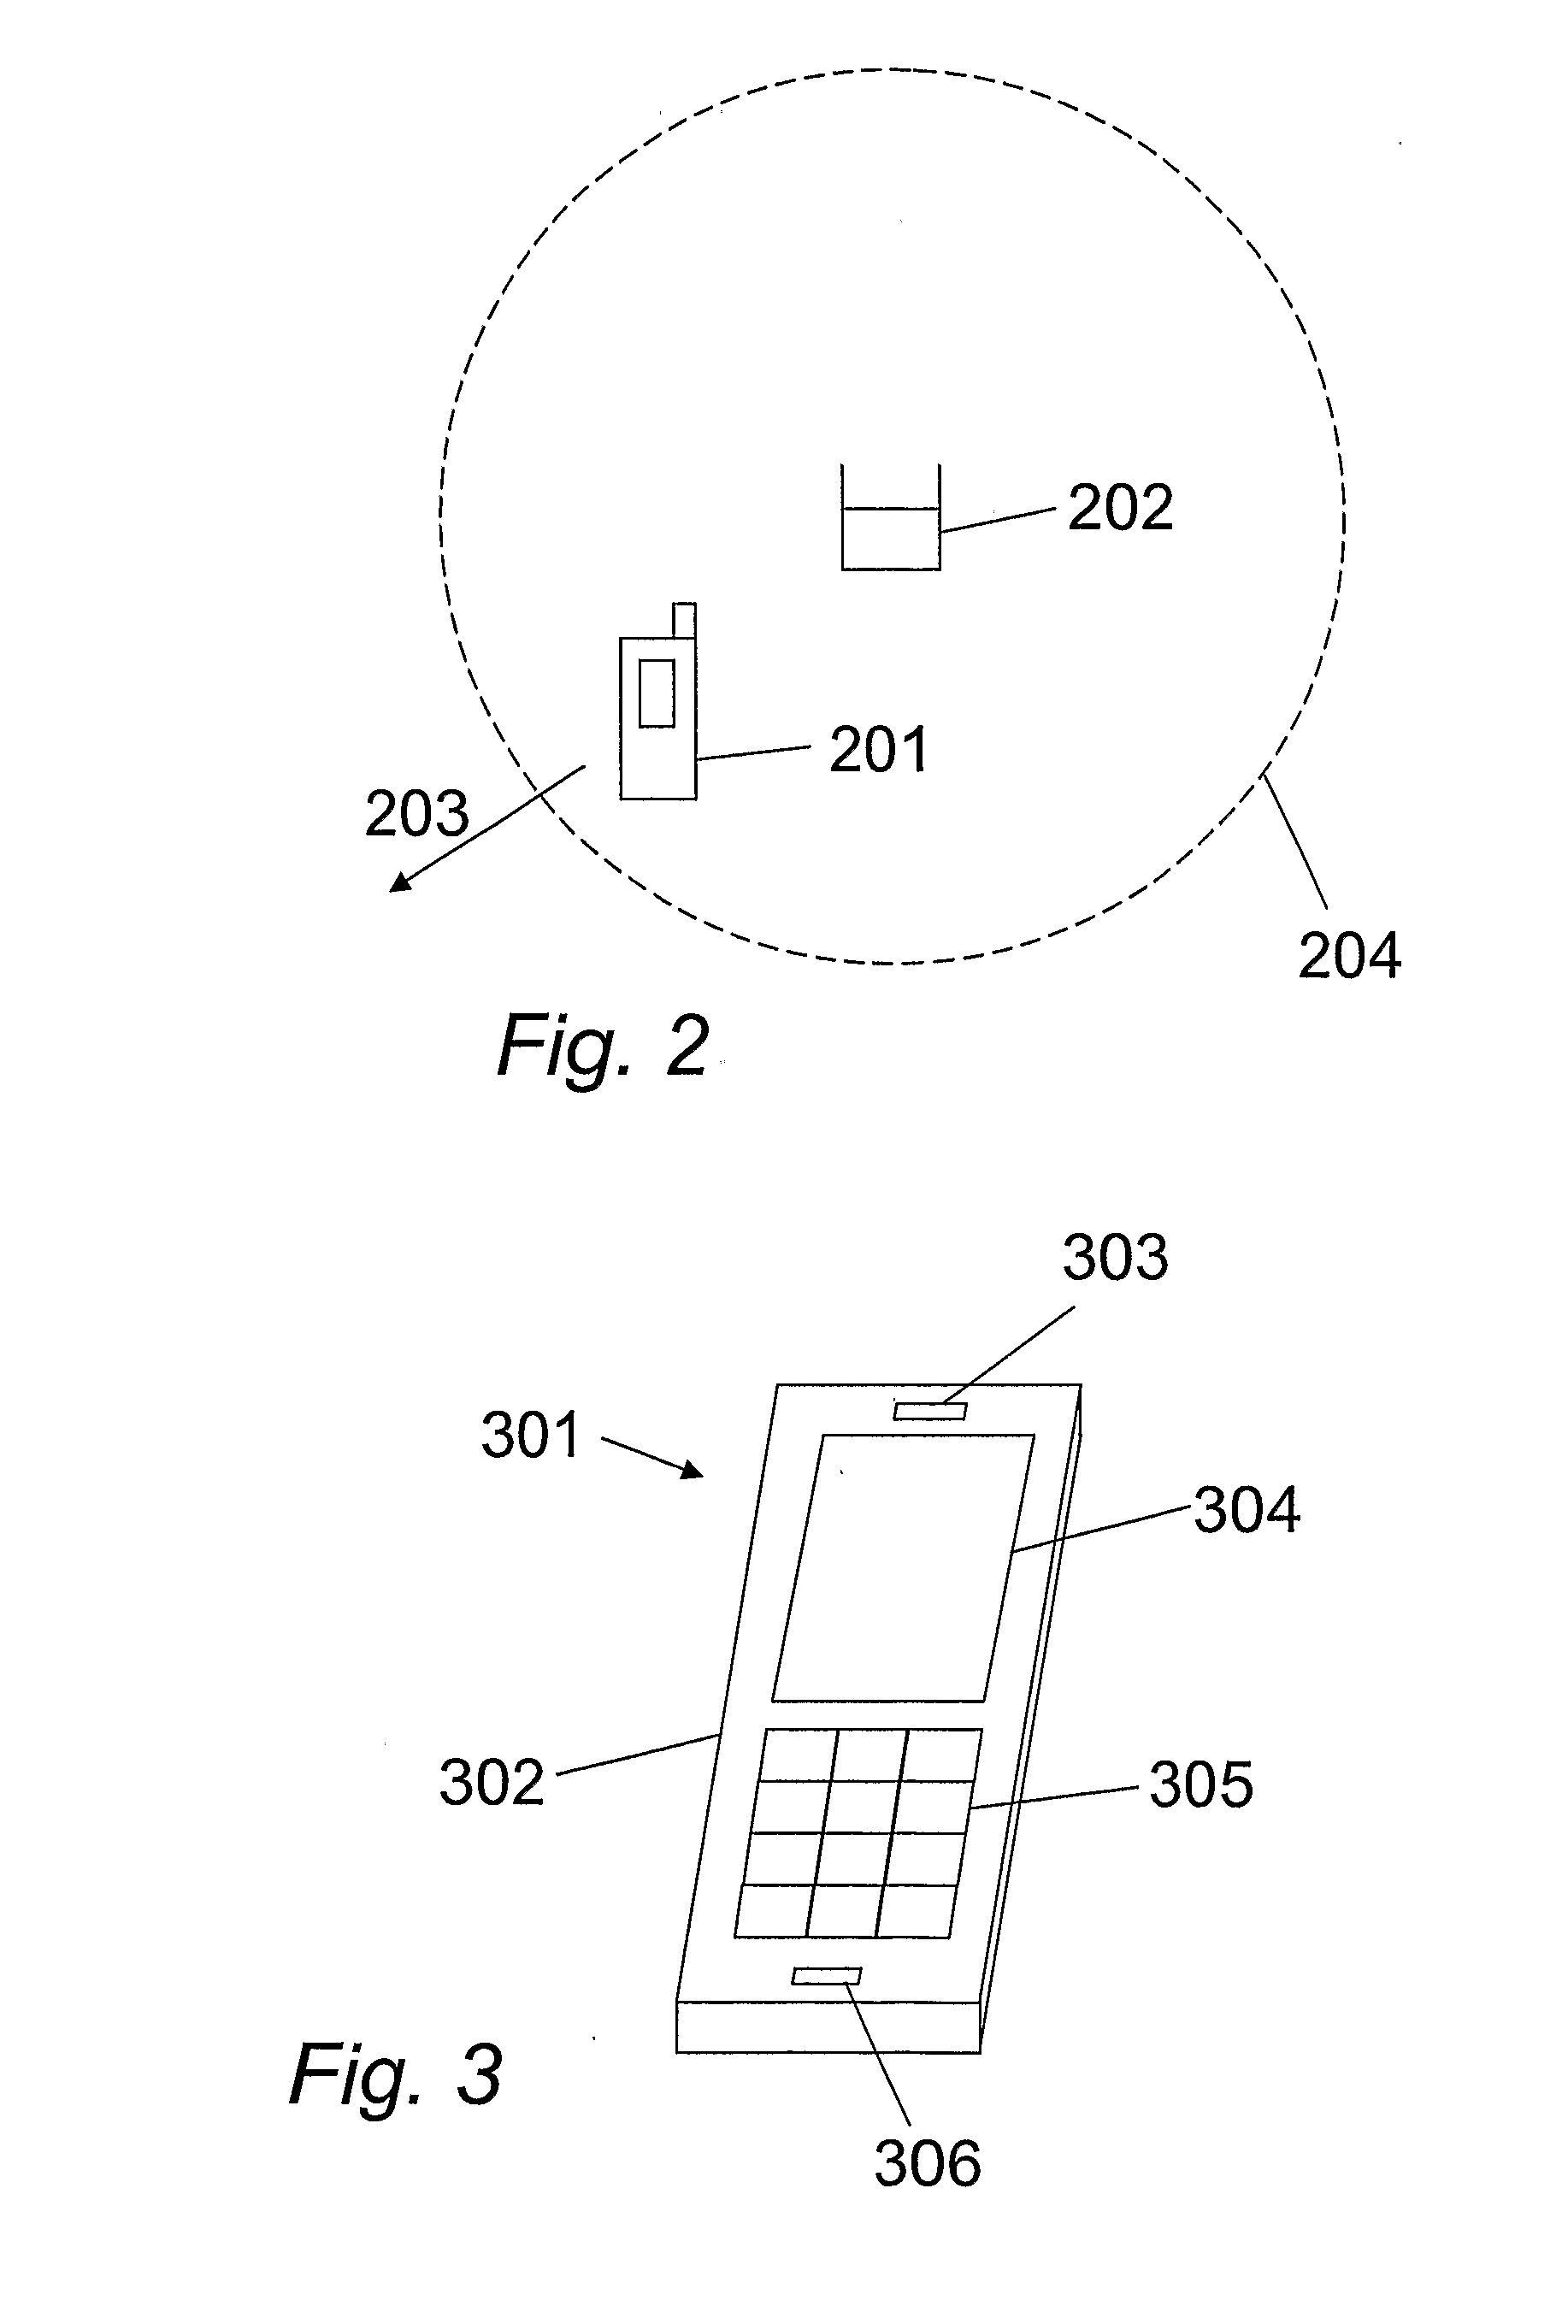 Computing Device and Communications Framework